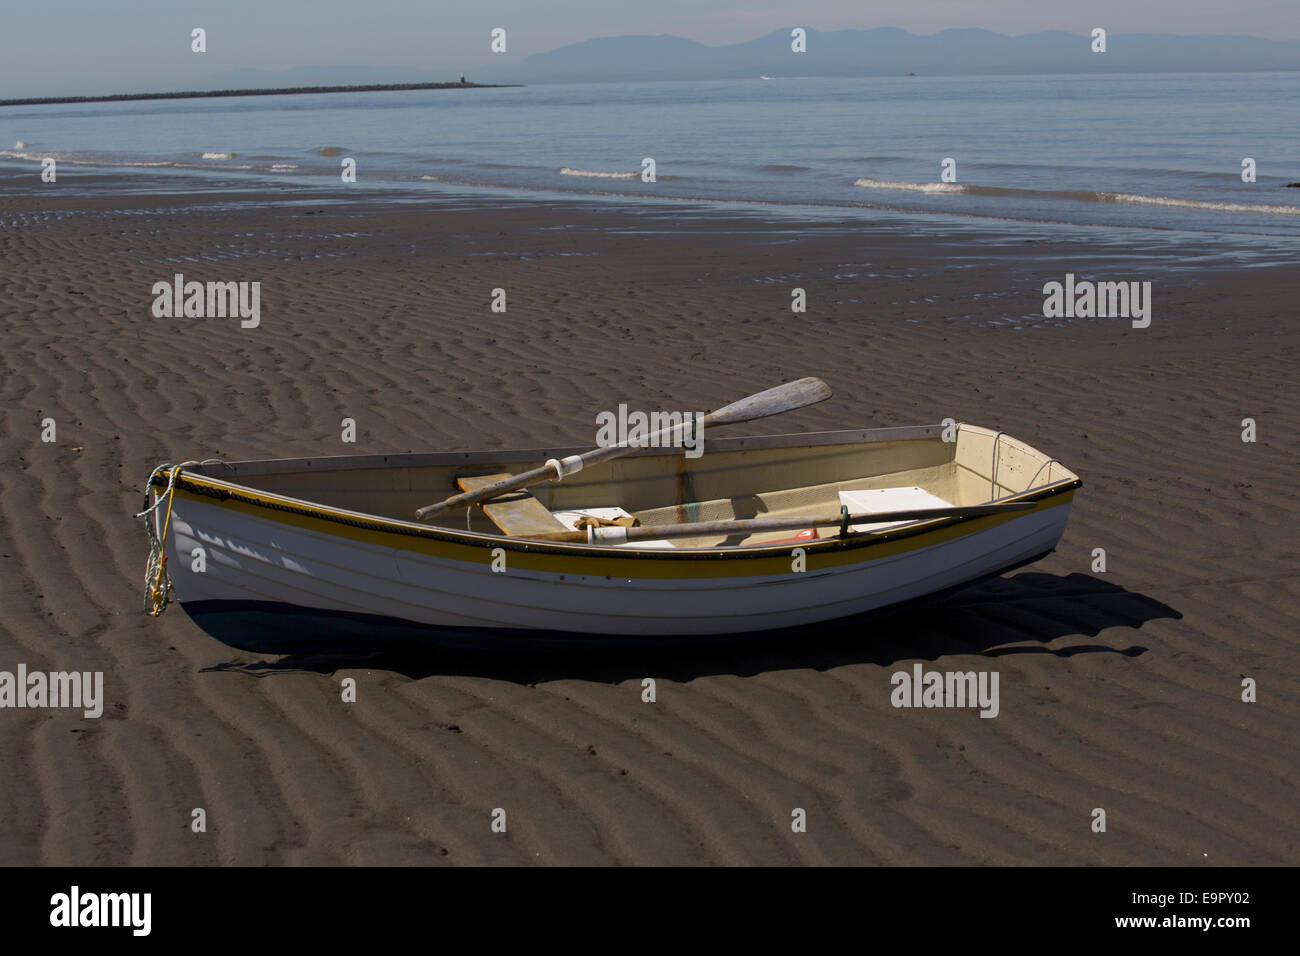 A white rowboat on a sandy shore on Wreck Beach, Vancouver, British Columbia, Canada. Stock Photo